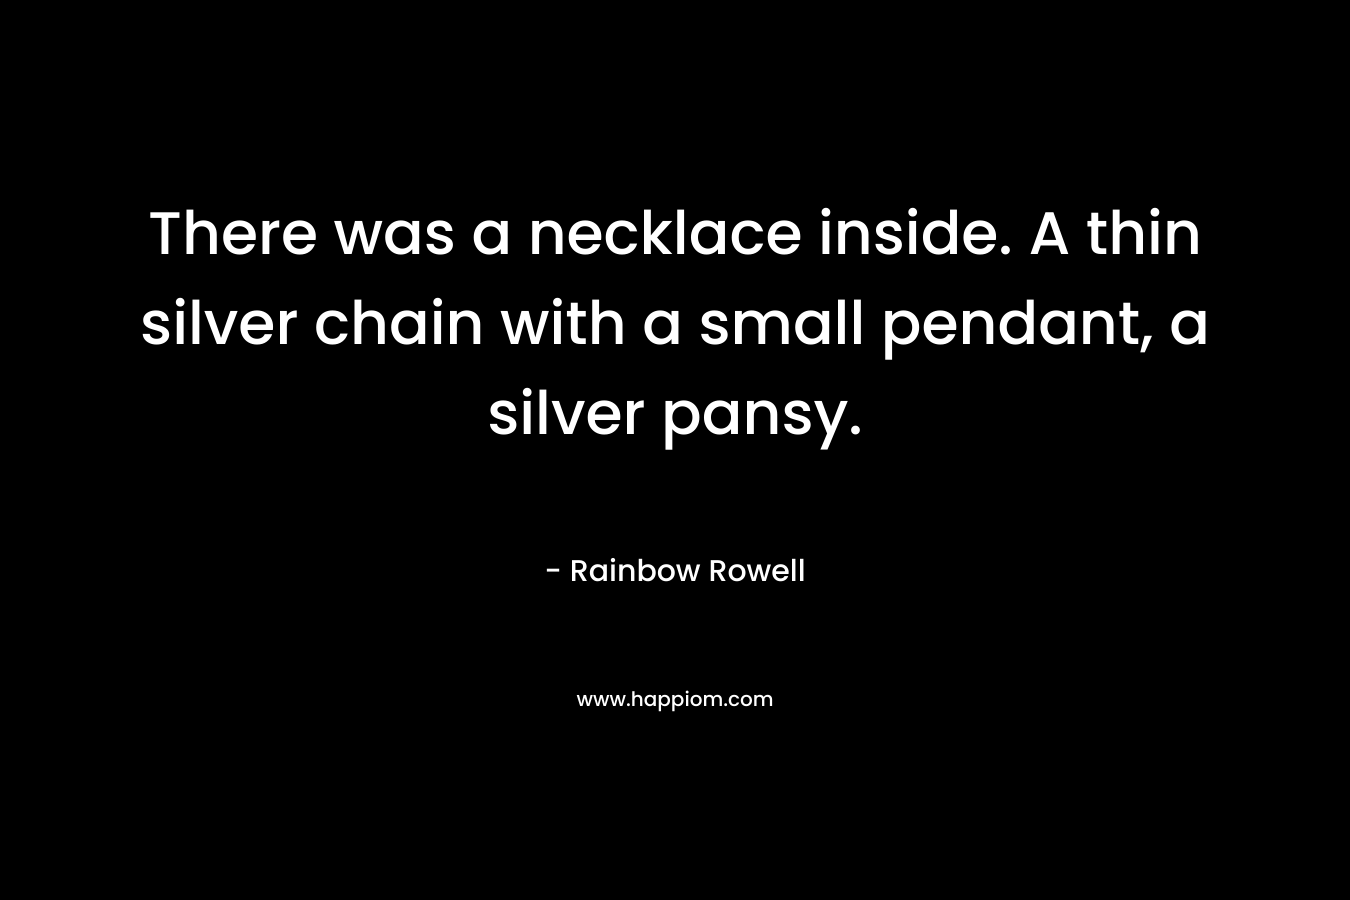 There was a necklace inside. A thin silver chain with a small pendant, a silver pansy. – Rainbow Rowell